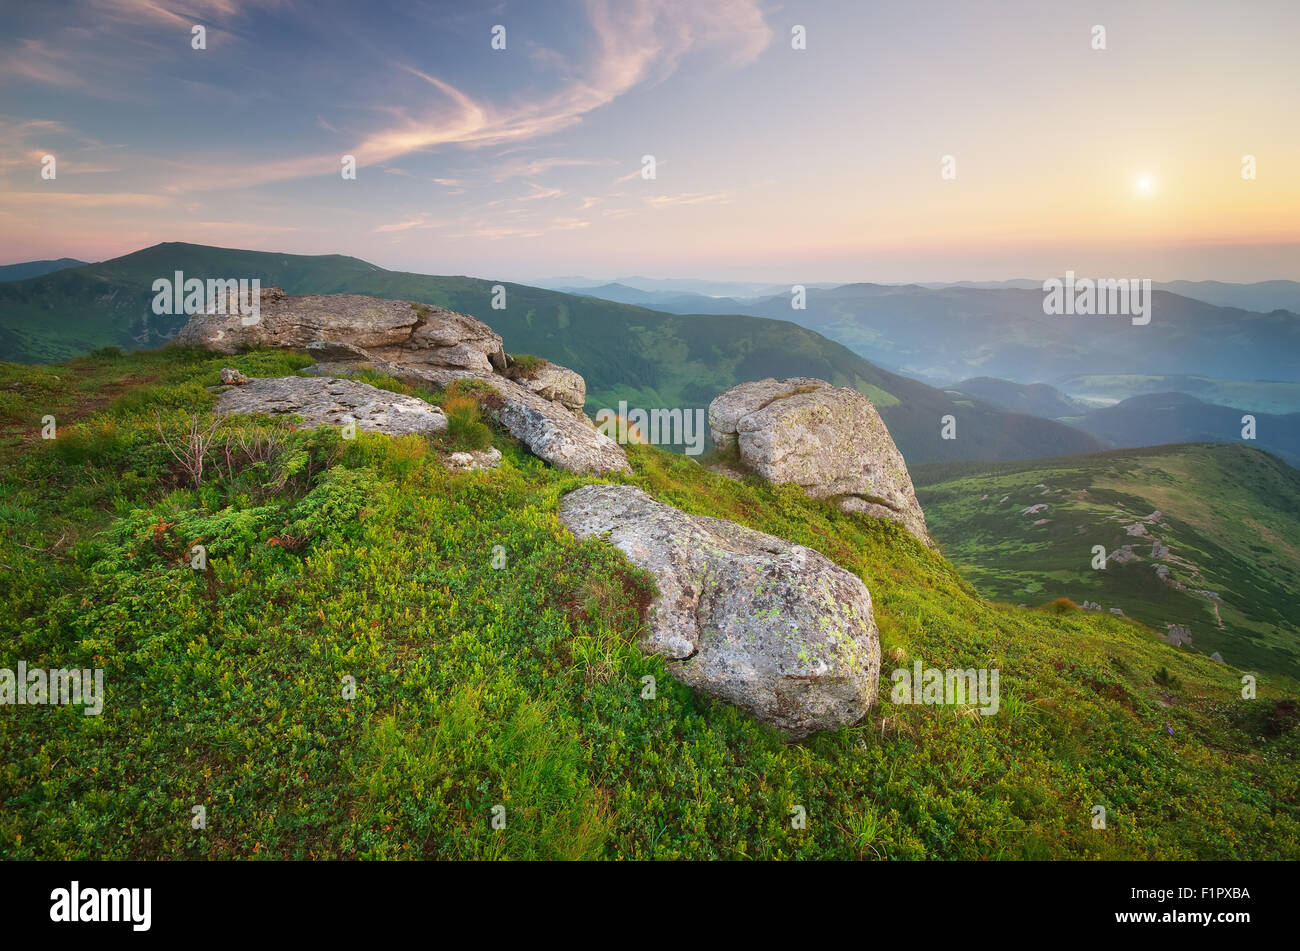 Mountain landscape. Composition of nature. Stock Photo